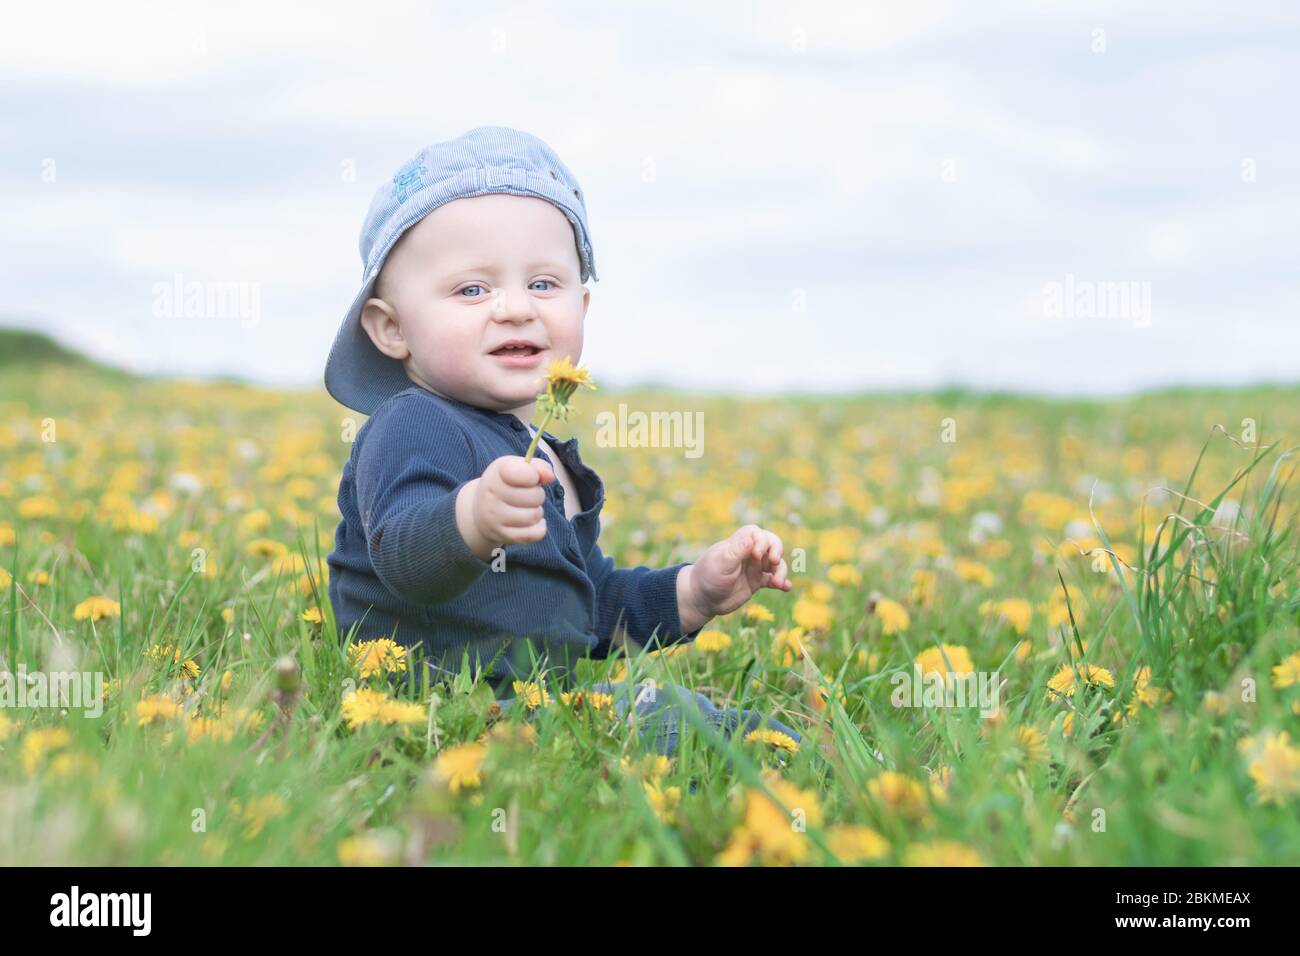 A little  caucasian boy in a baseball cap sits in a meadow full of blooming dandelions and holds one in his hand and looks into the camera. Stock Photo